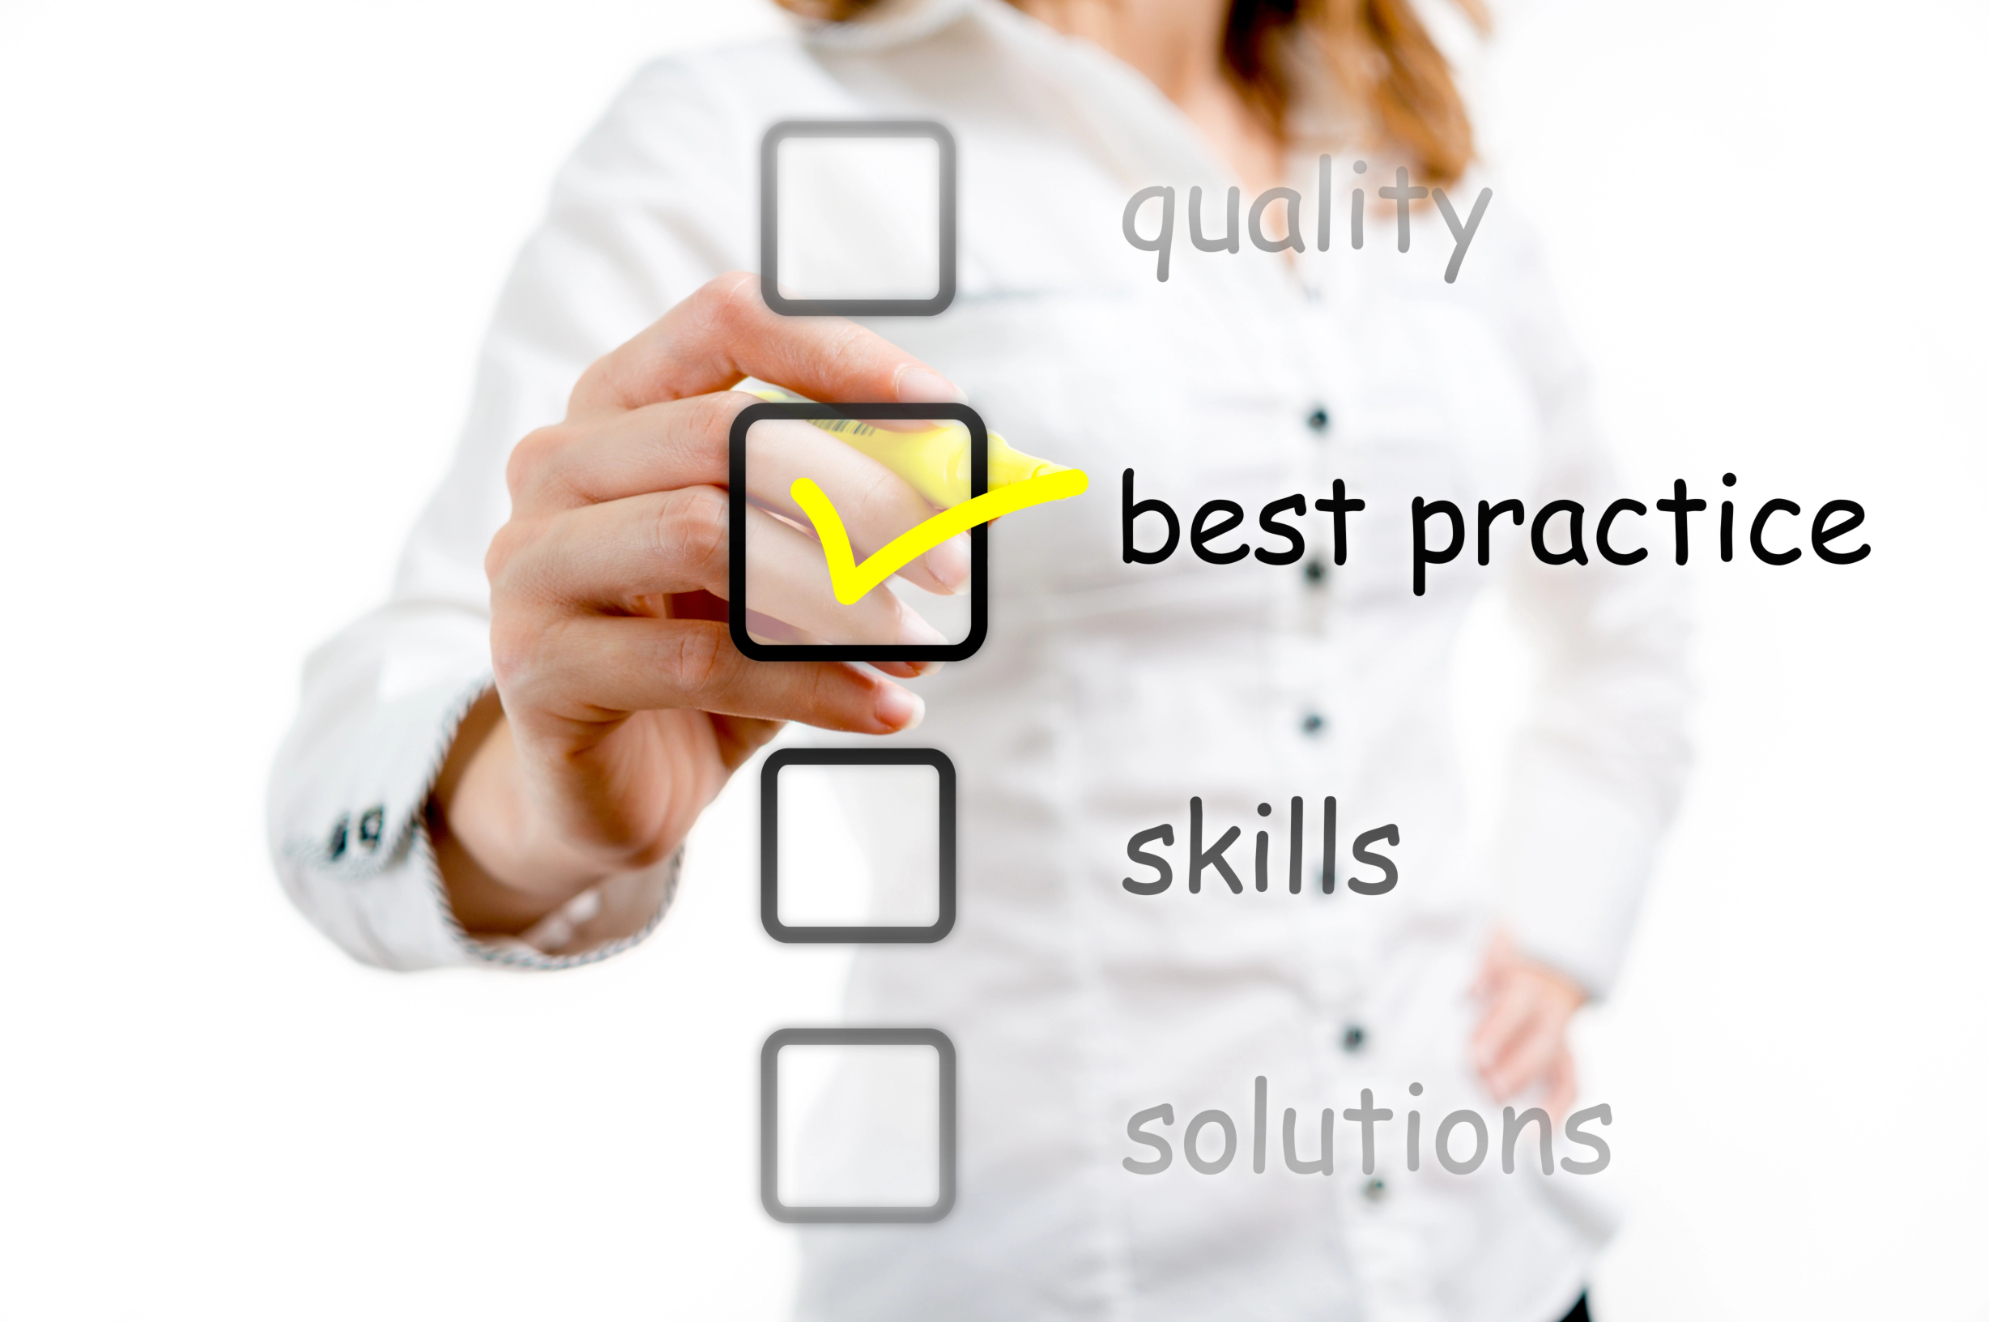 Woman checking off "Best Practices" on list